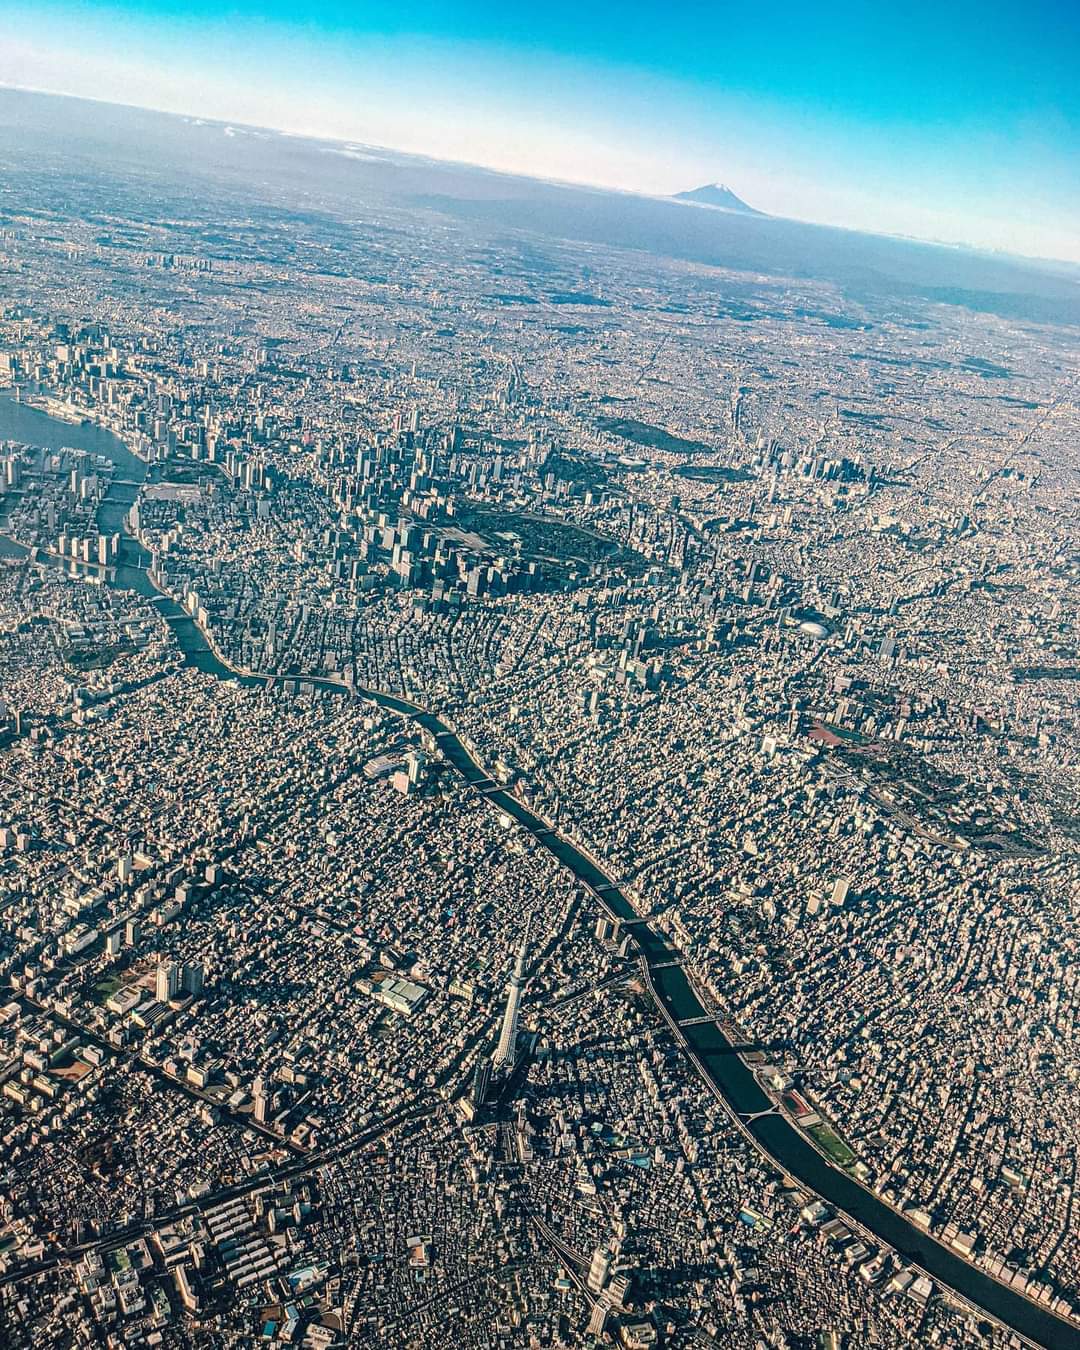 Tokyo with Mt.Fuji in the background